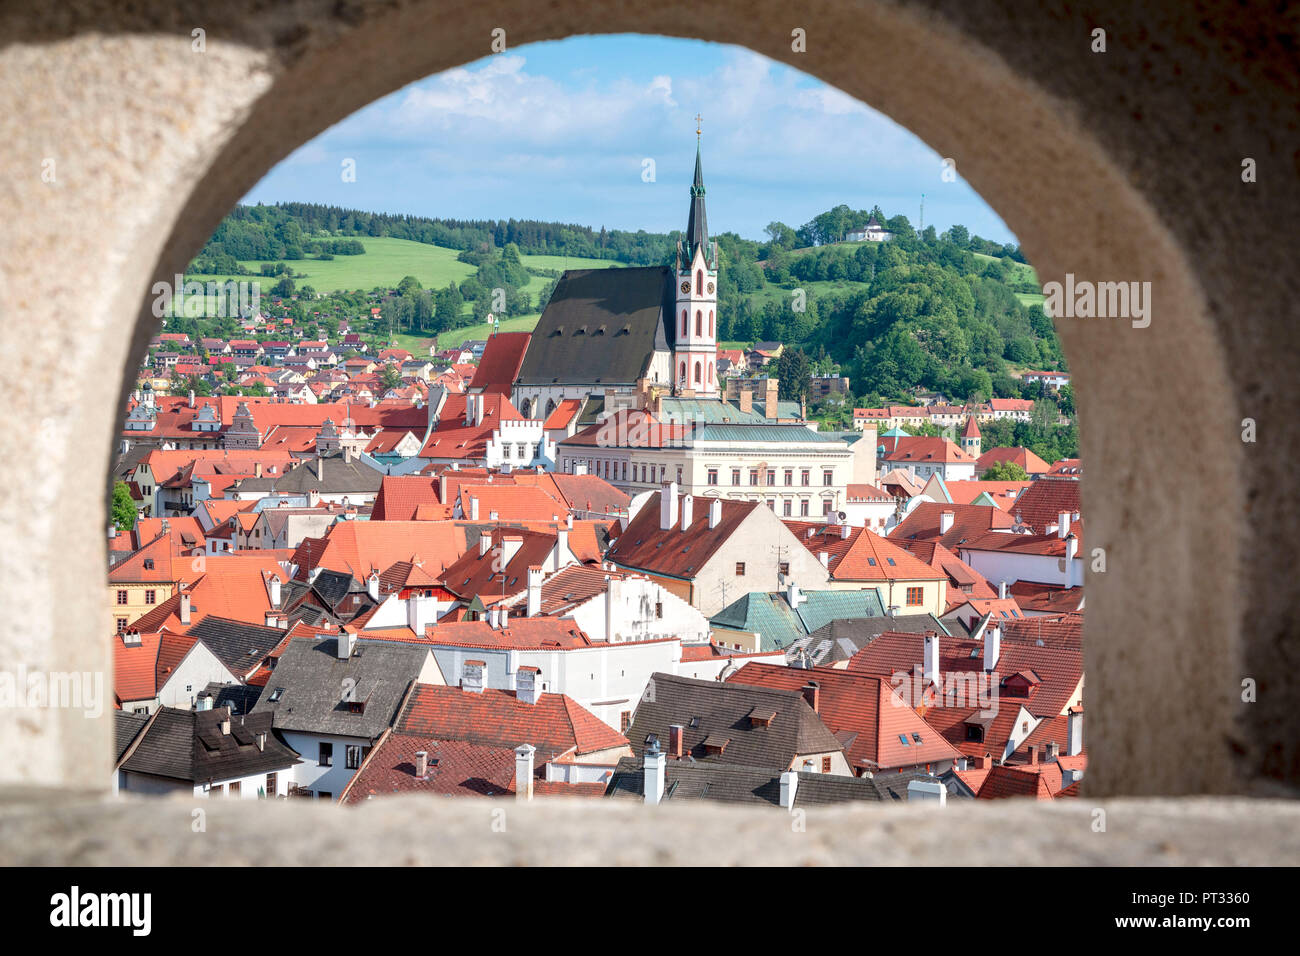 Cesky Krumlov, South Bohemia, Czech Republic, Europe, view of the city from a vindow in the Krumlov castle Stock Photo